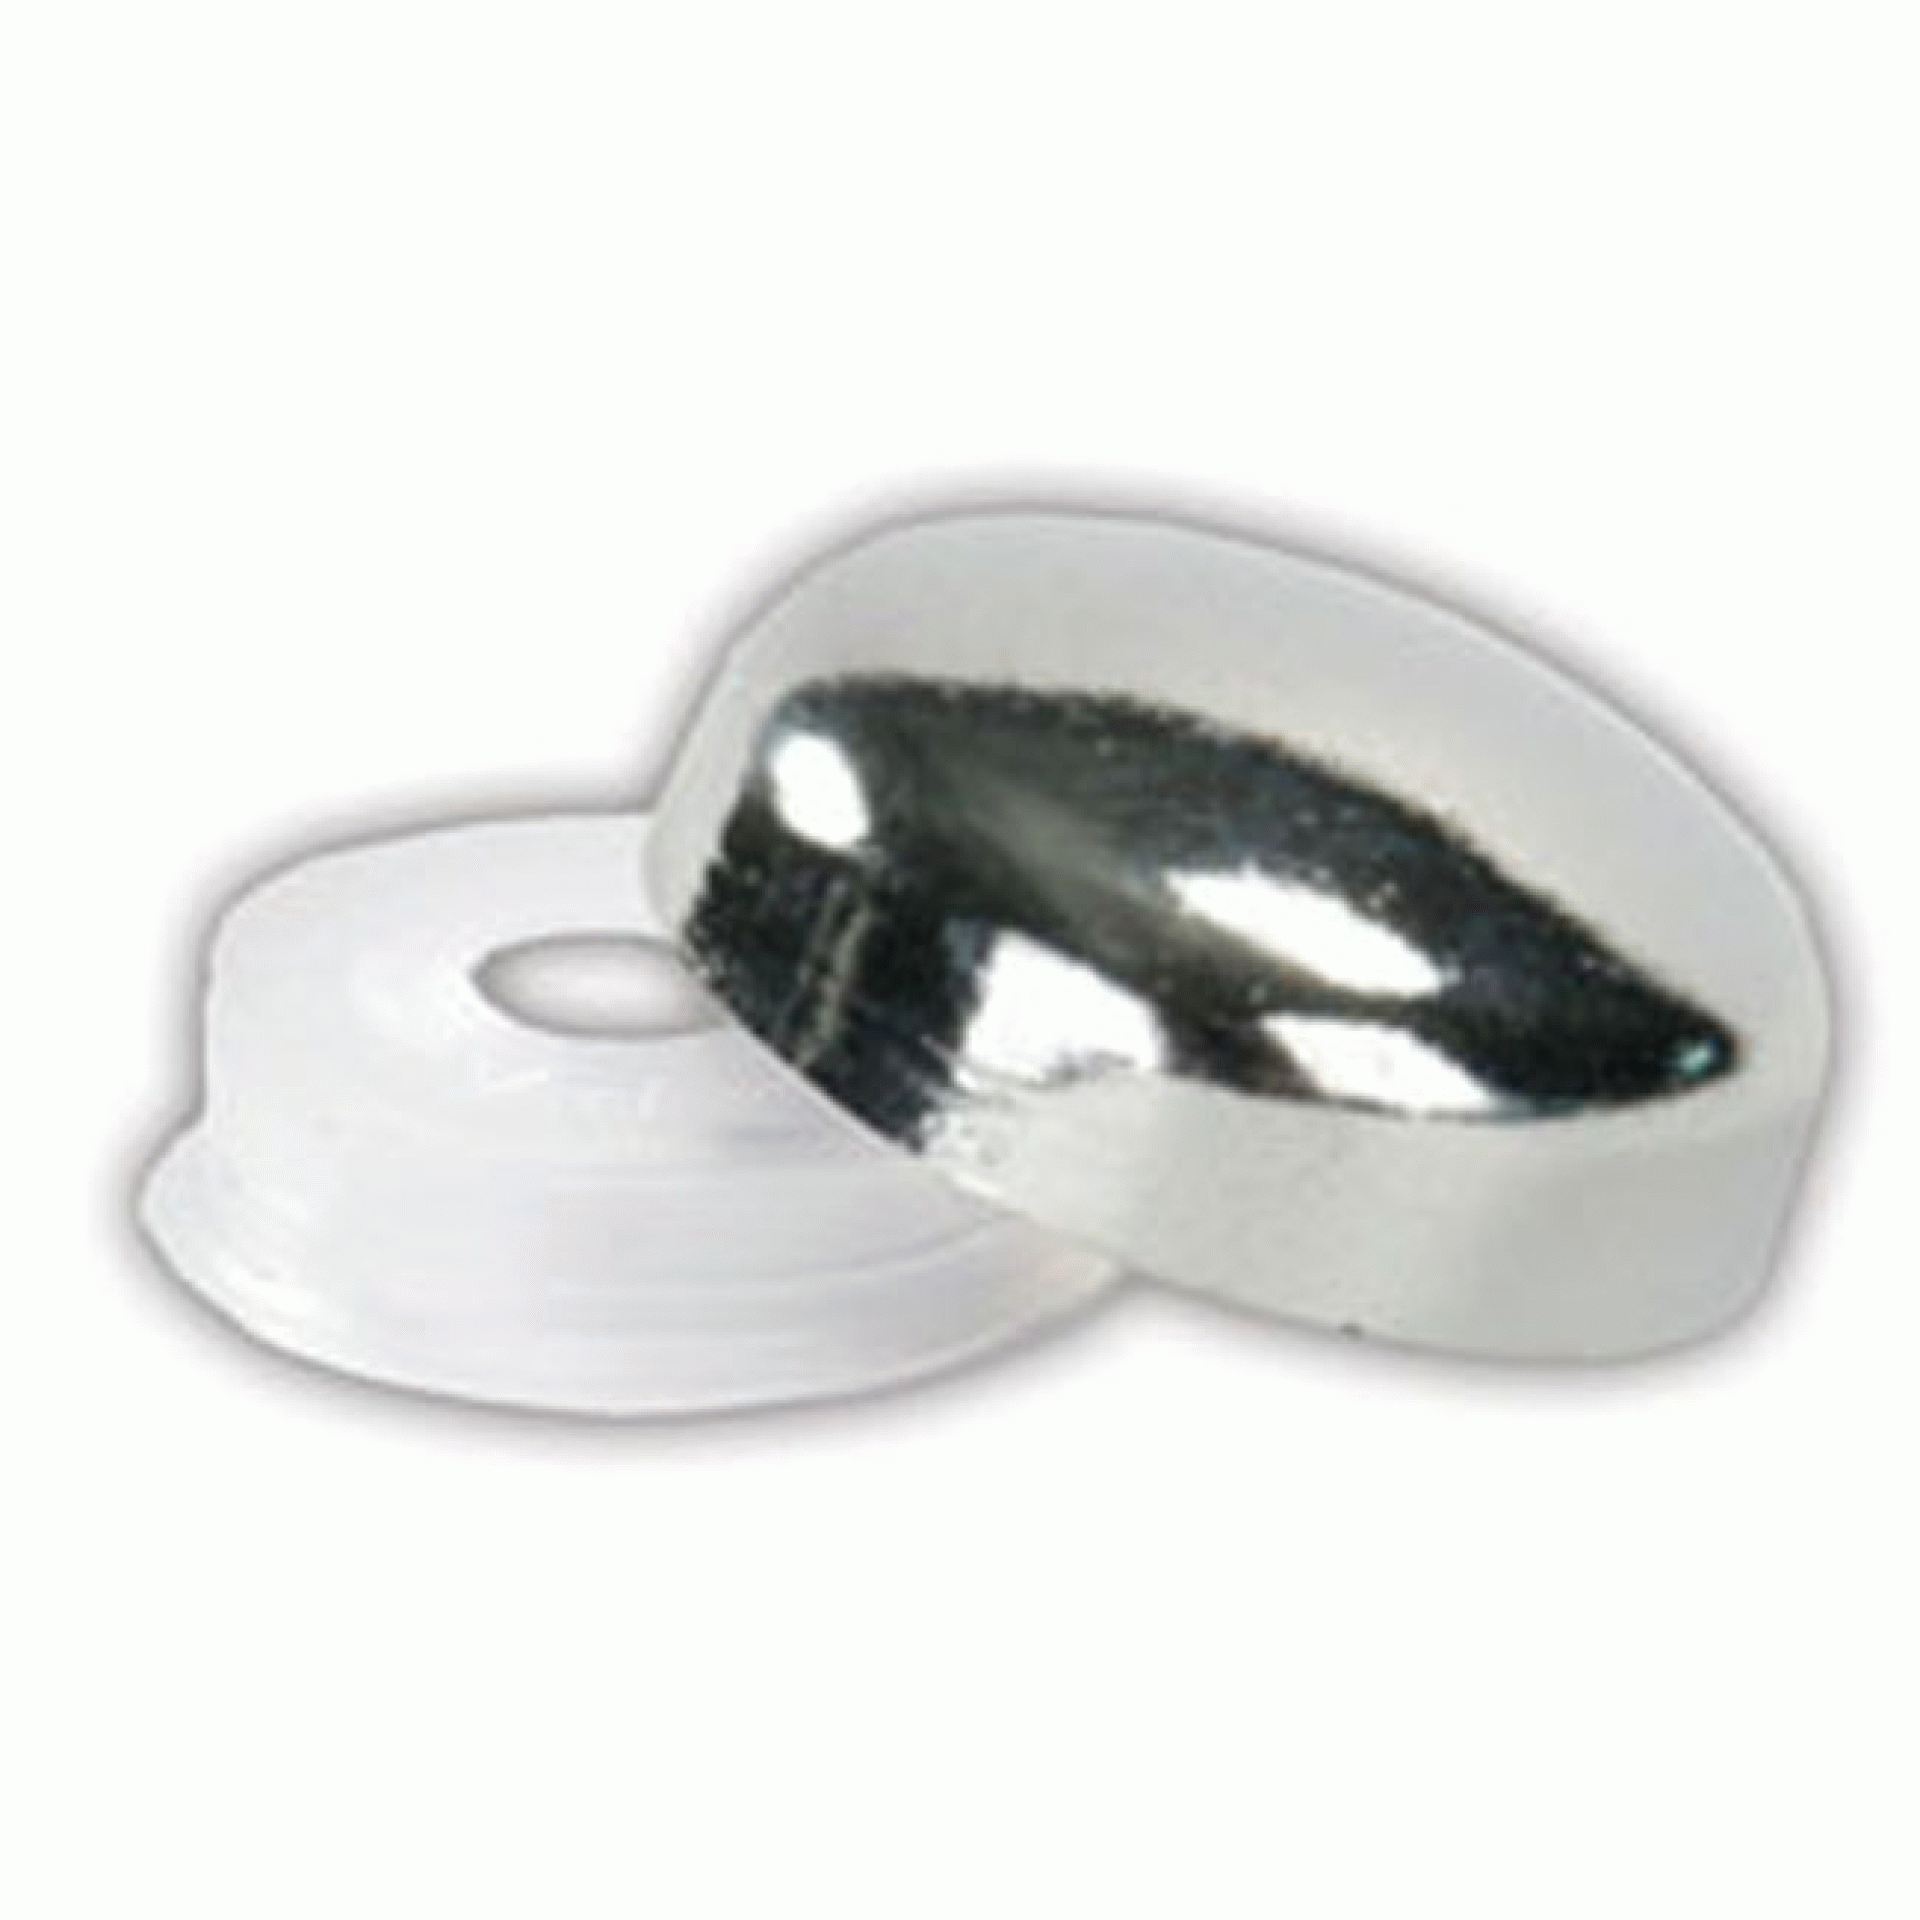 J R PRODUCTS | 20405 | SCREW COVERS CHROME - 14/PK